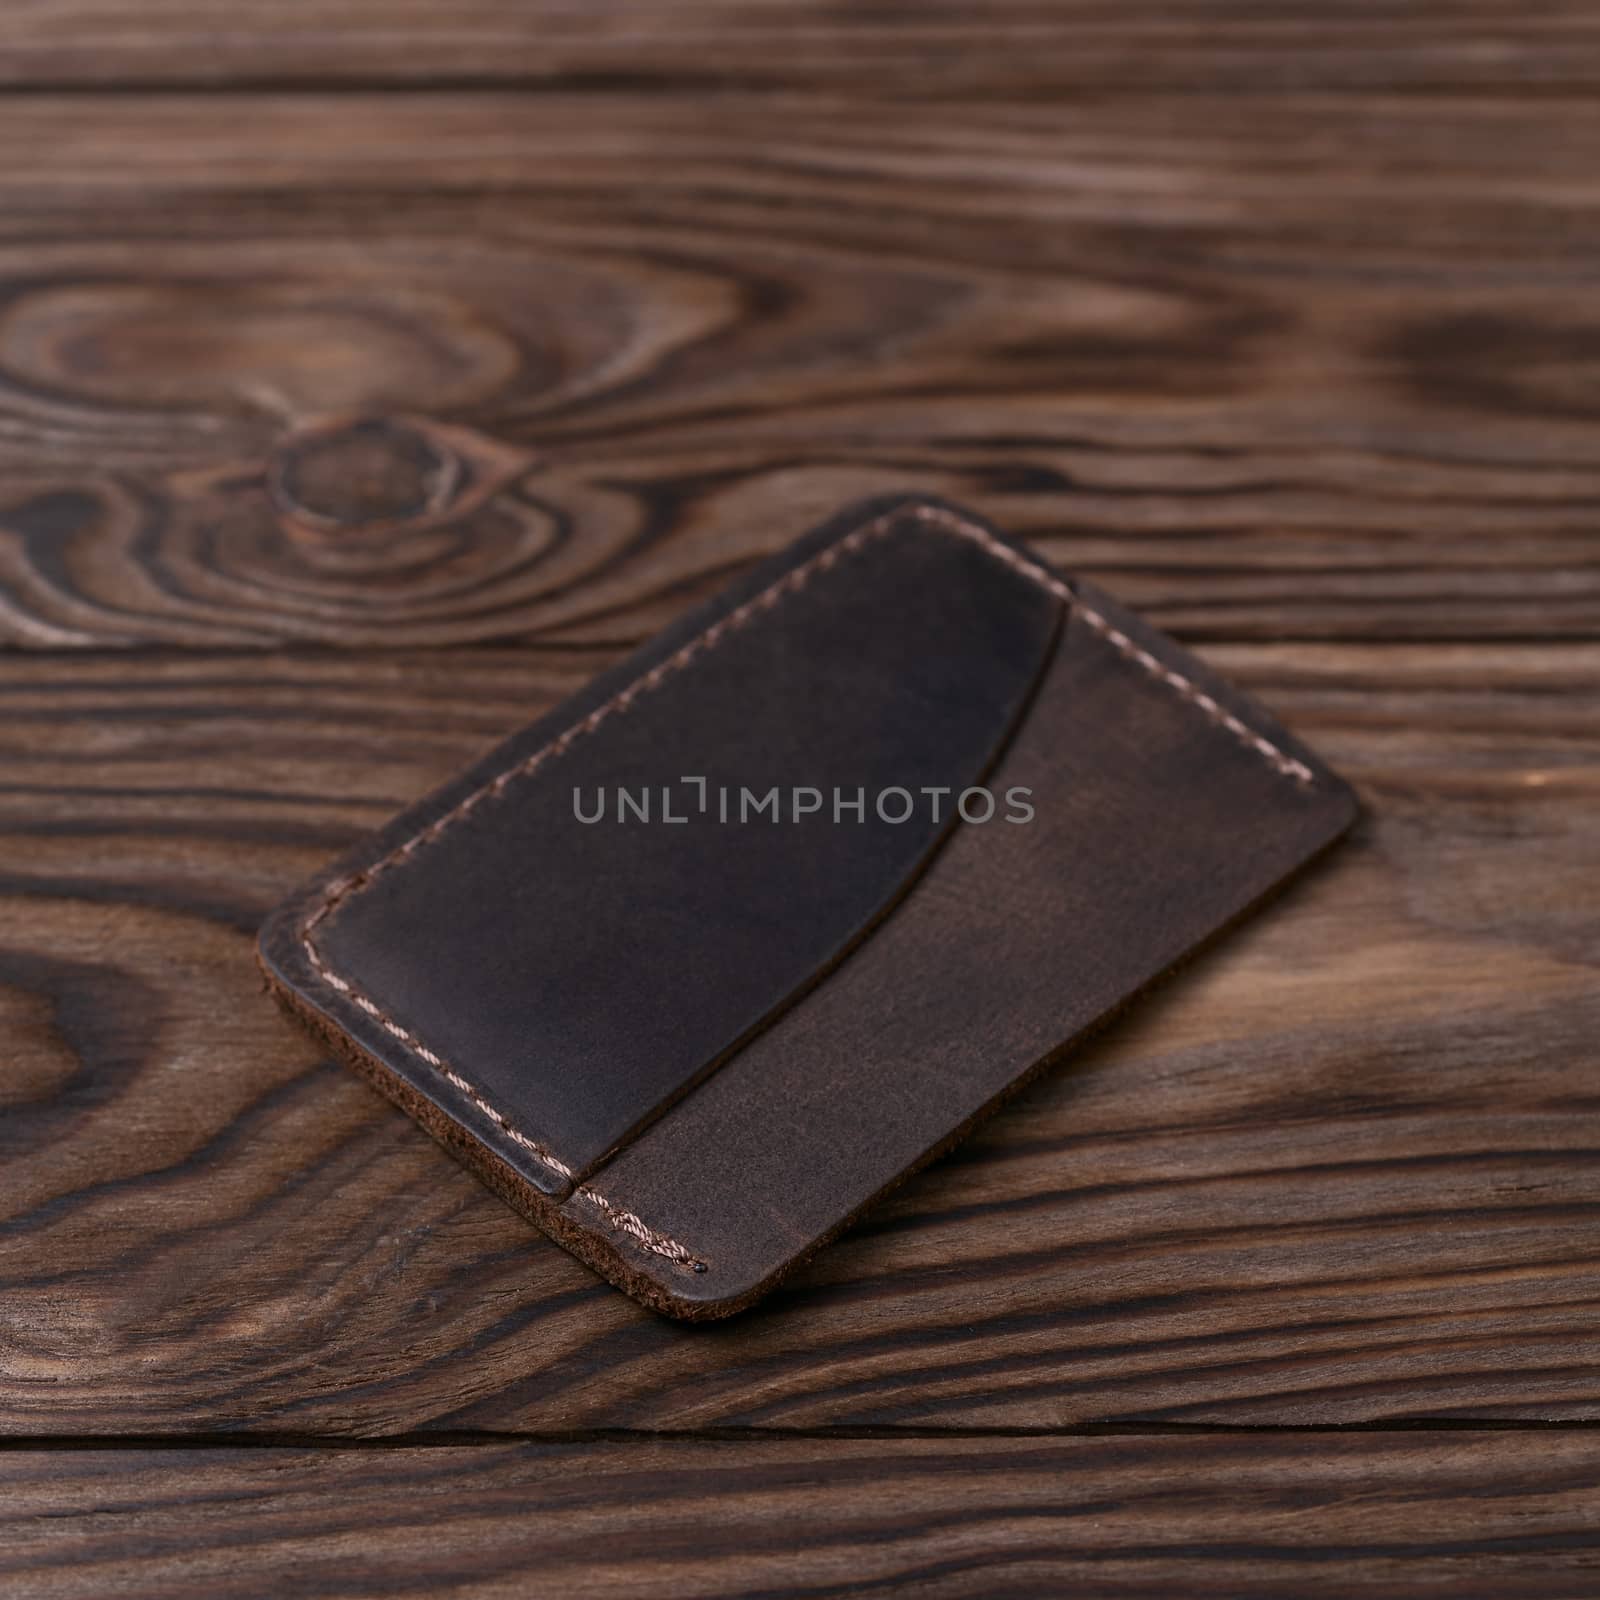 Brown colour handmade leather one pocket cardholder on wooden background. Stock photo with soft blurred background. by alexsdriver